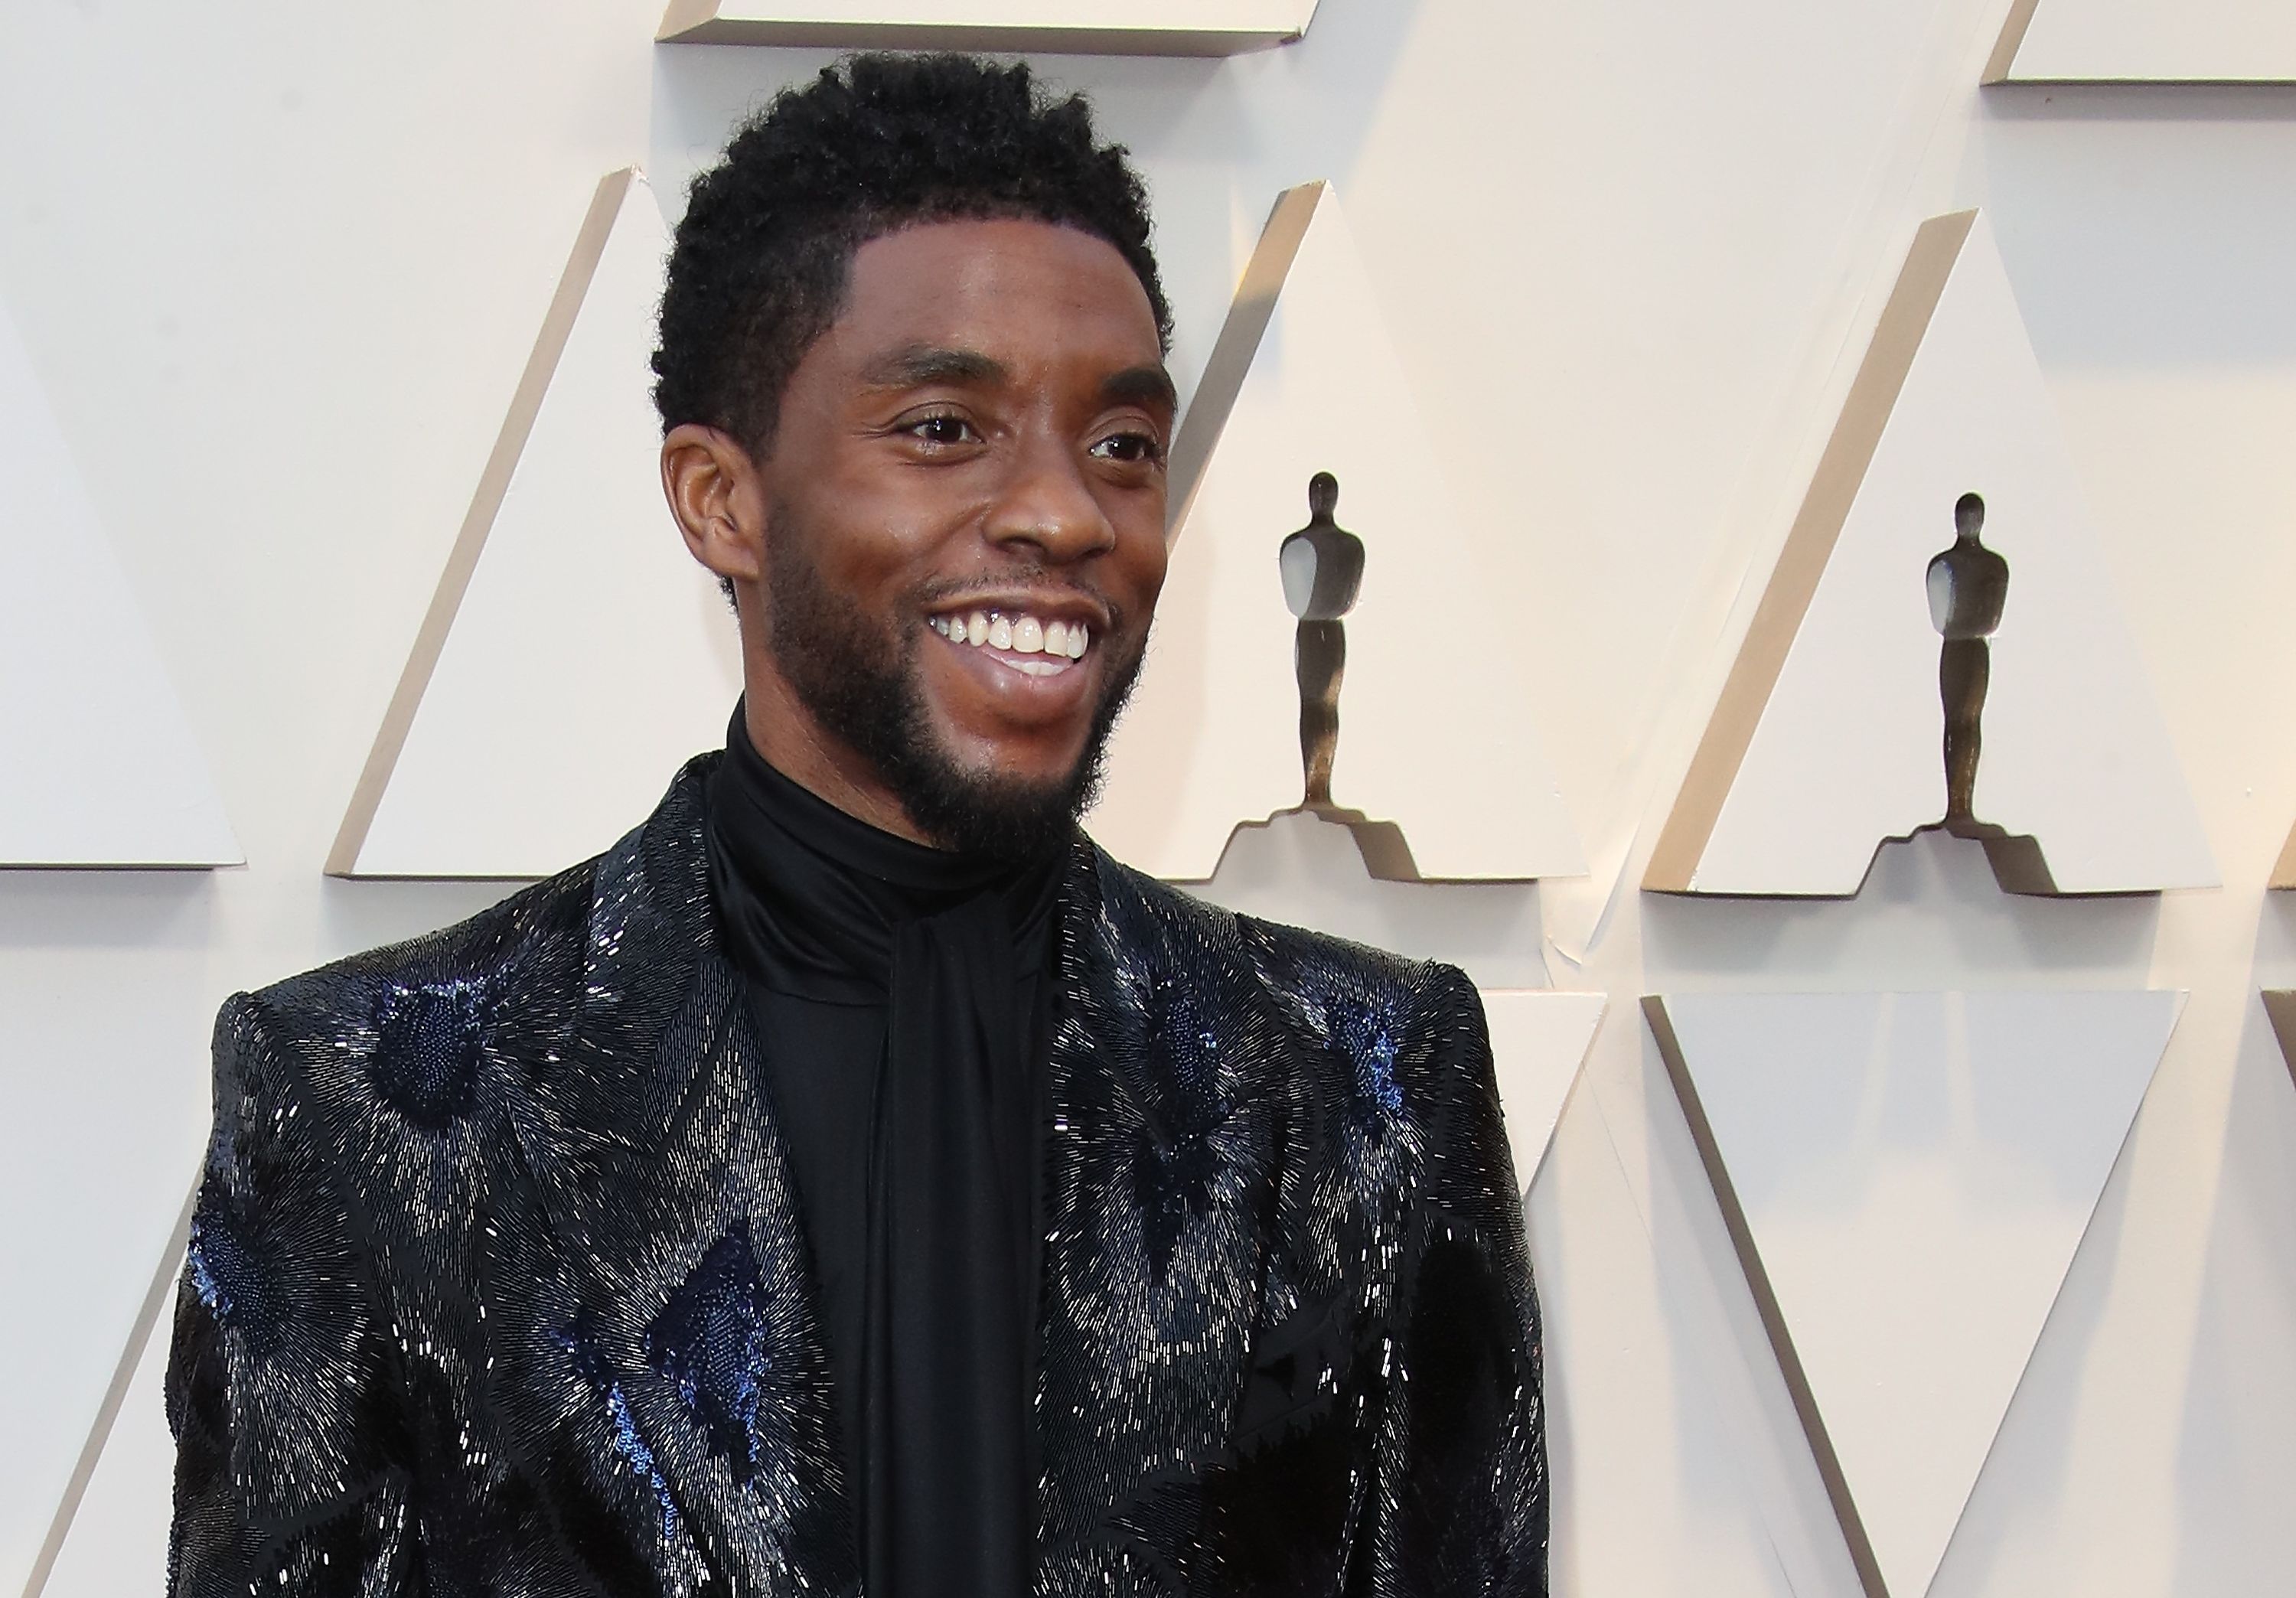 Chadwick Boseman at The Annual Academy Awards on February 24, 2019 in Hollywood. | Source: Getty Images